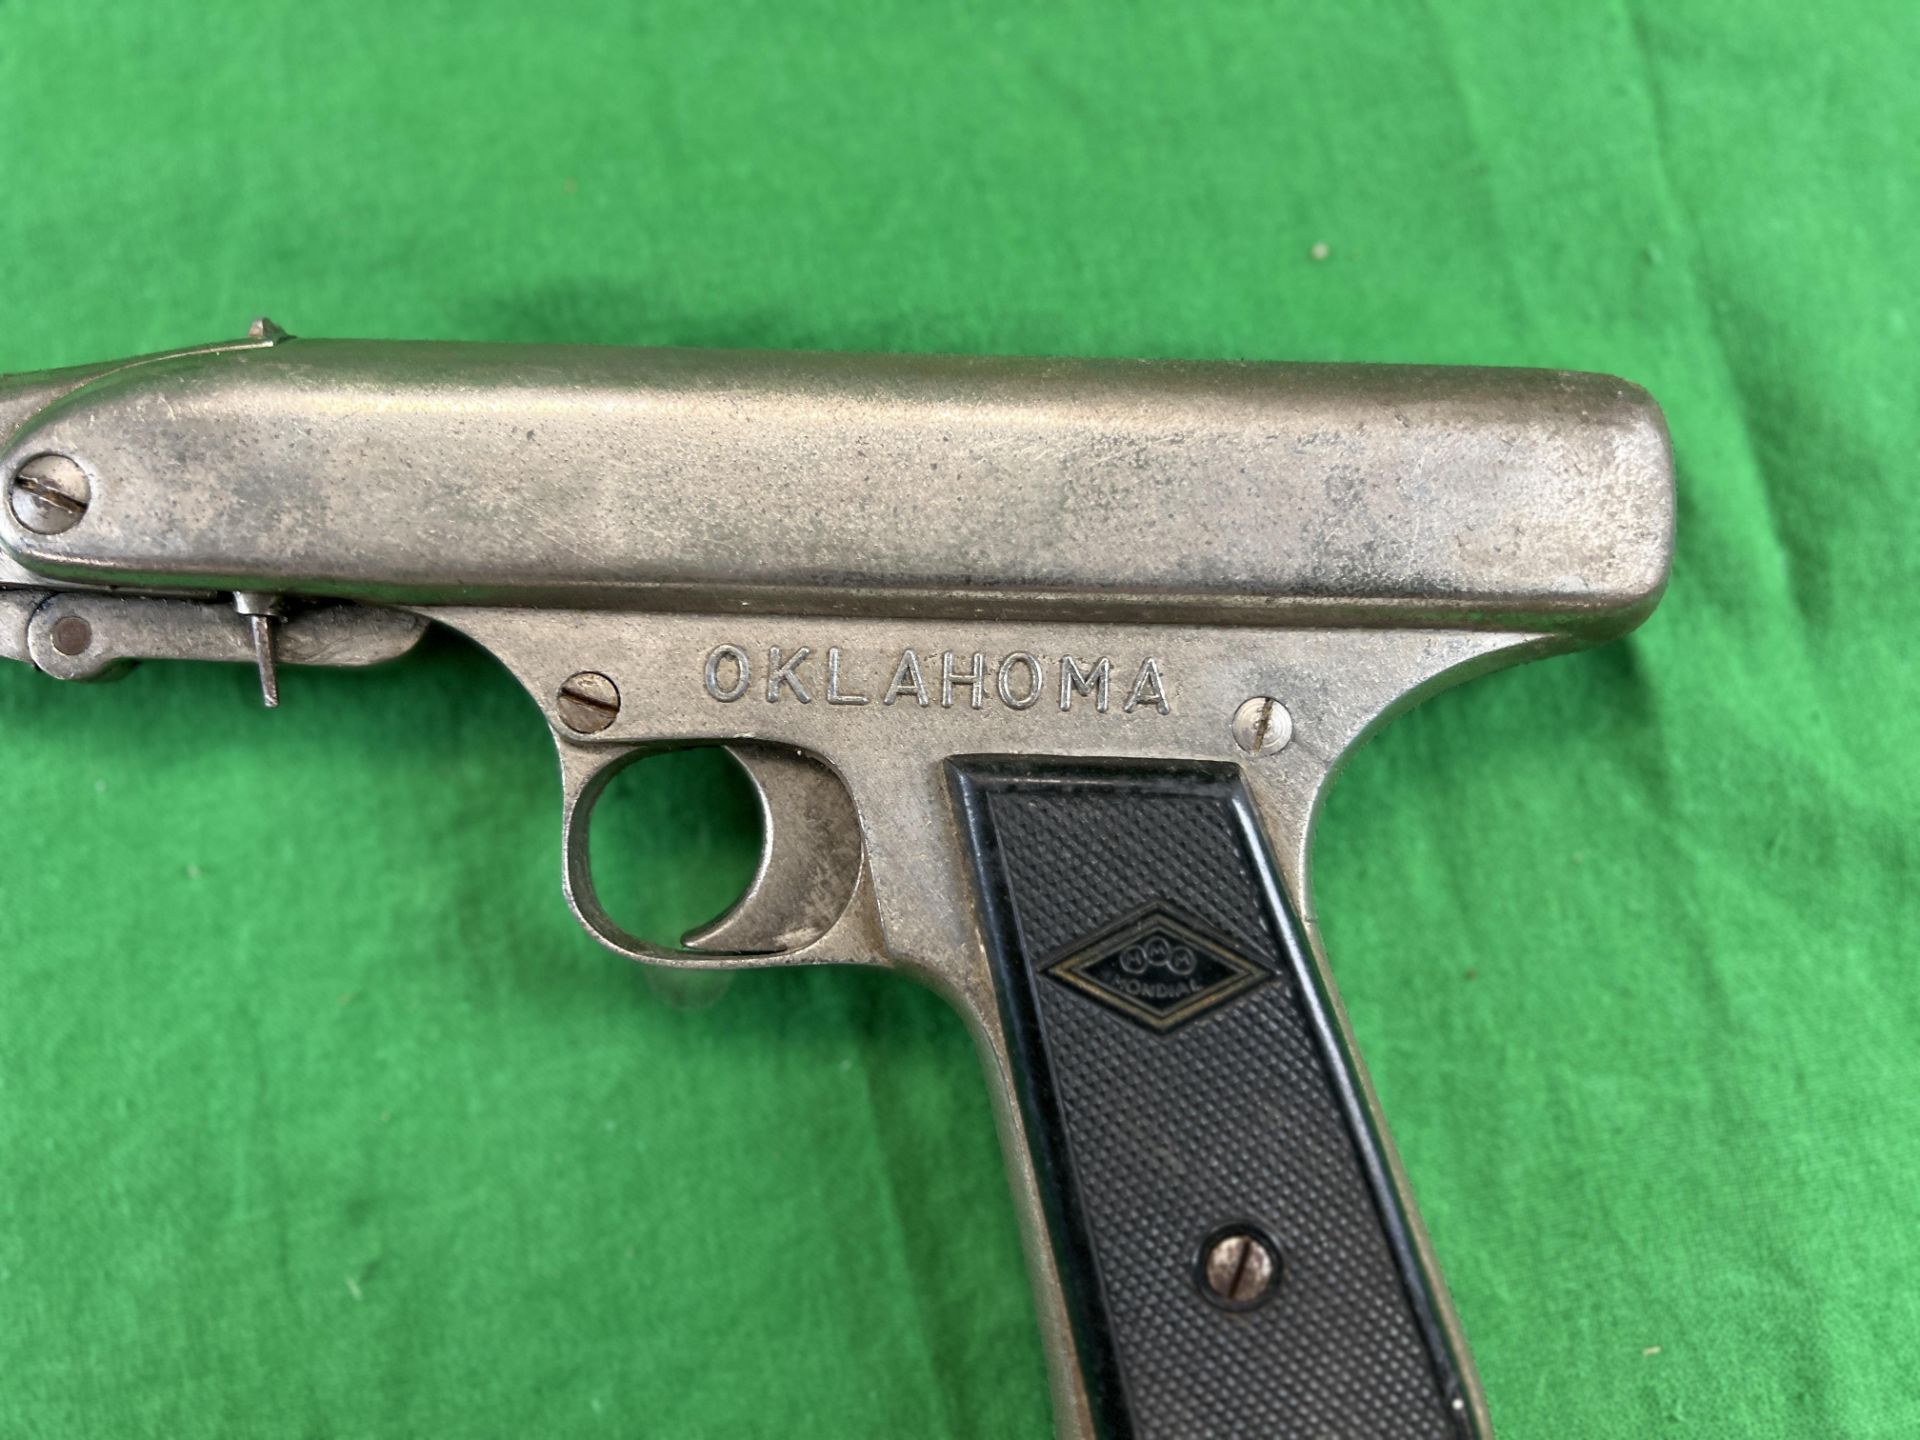 OKLAHOMA MONDIAL VINTAGE ITALIAN AIR PISTOL - NO POSTAGE OR PACKING AVAILABLE - Image 7 of 9